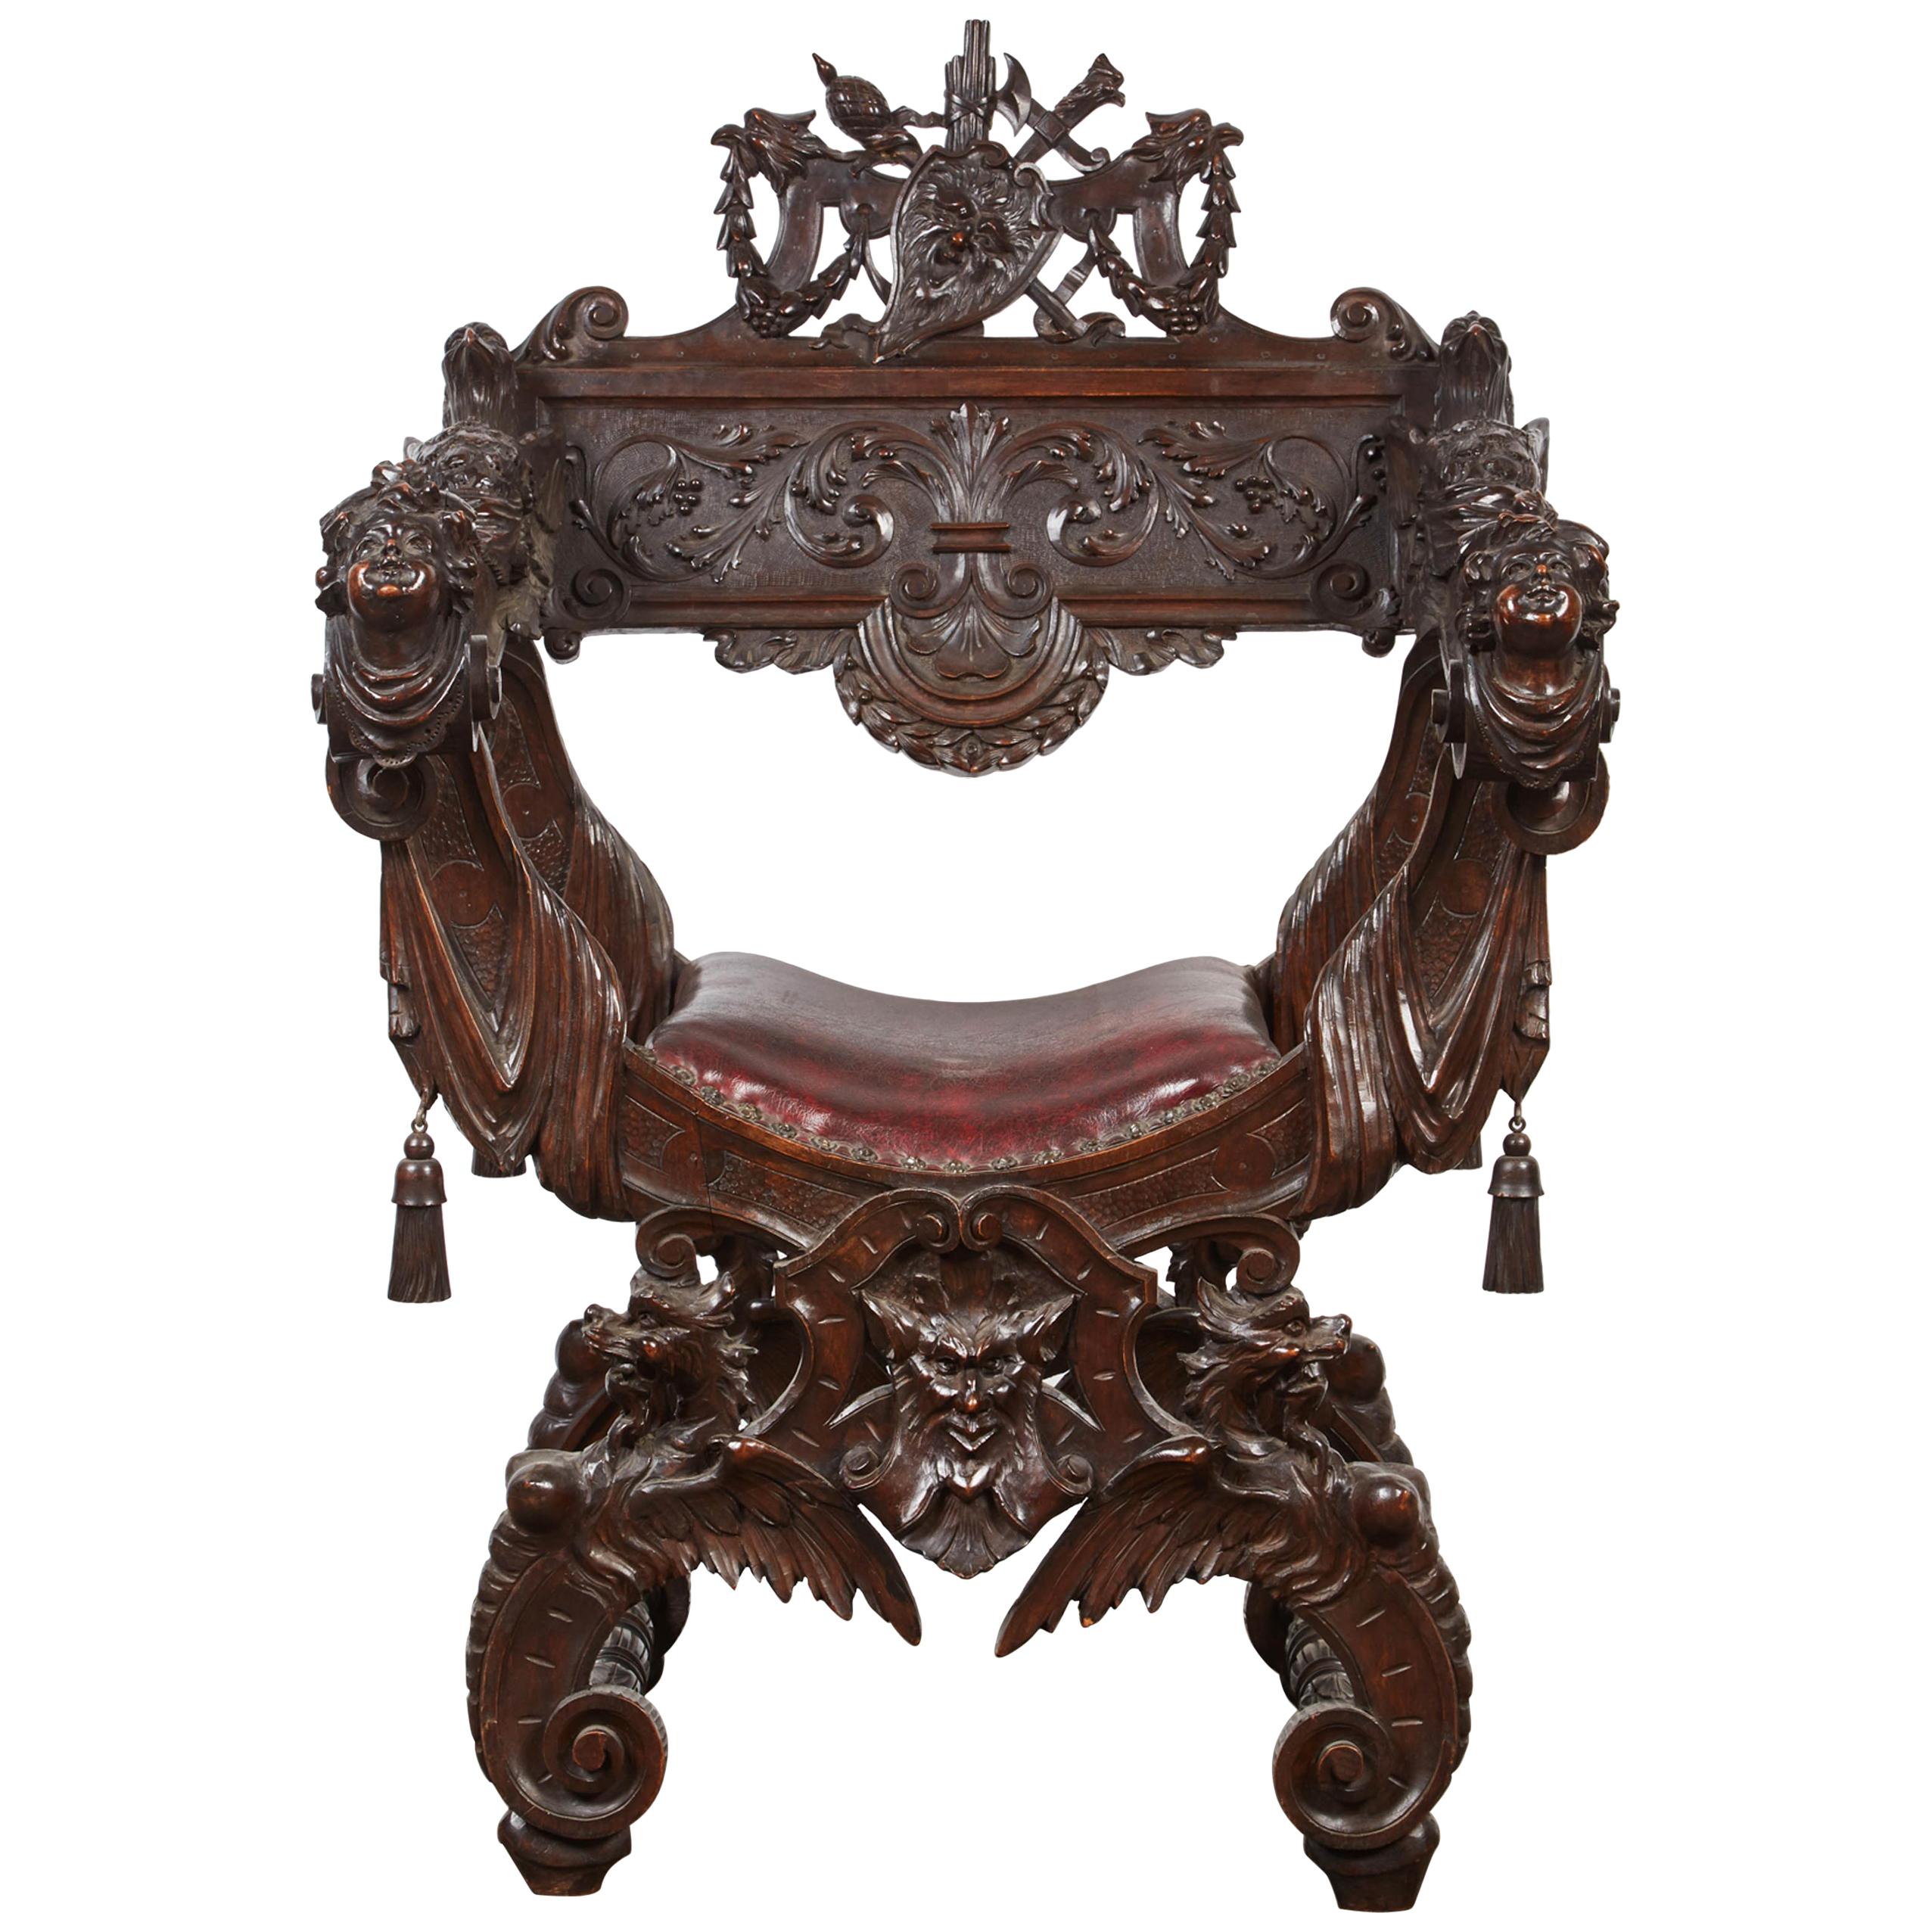 Late 19th Century American Savonarola Chair with Leather Upholstery